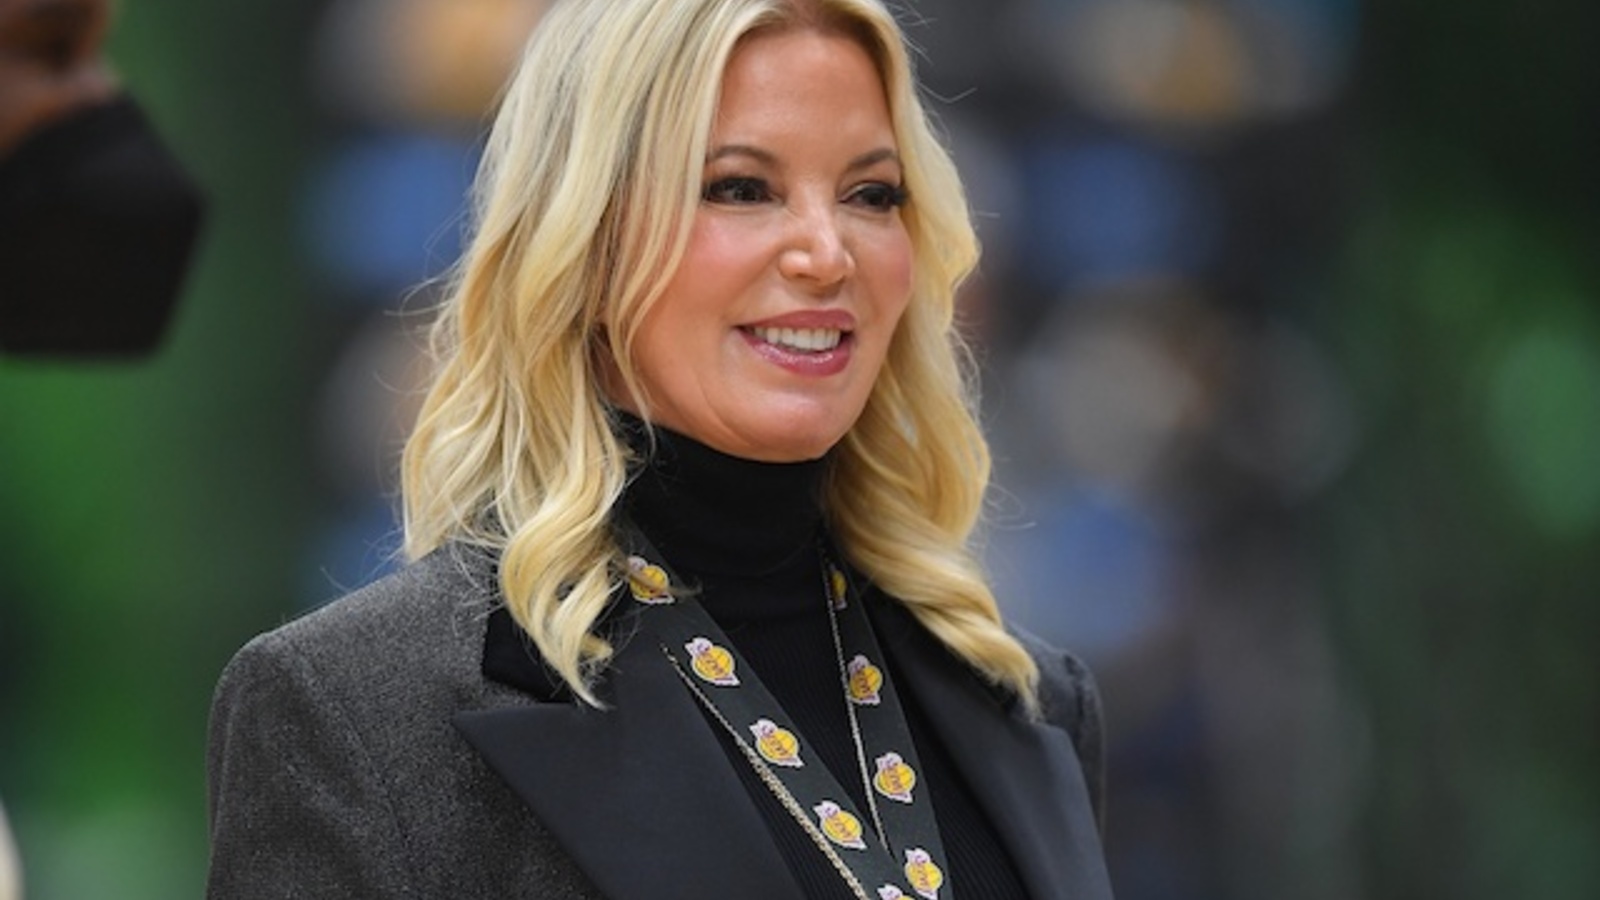 Jeanie Buss Doesn’t Understand Why People Question Her Inner Circle